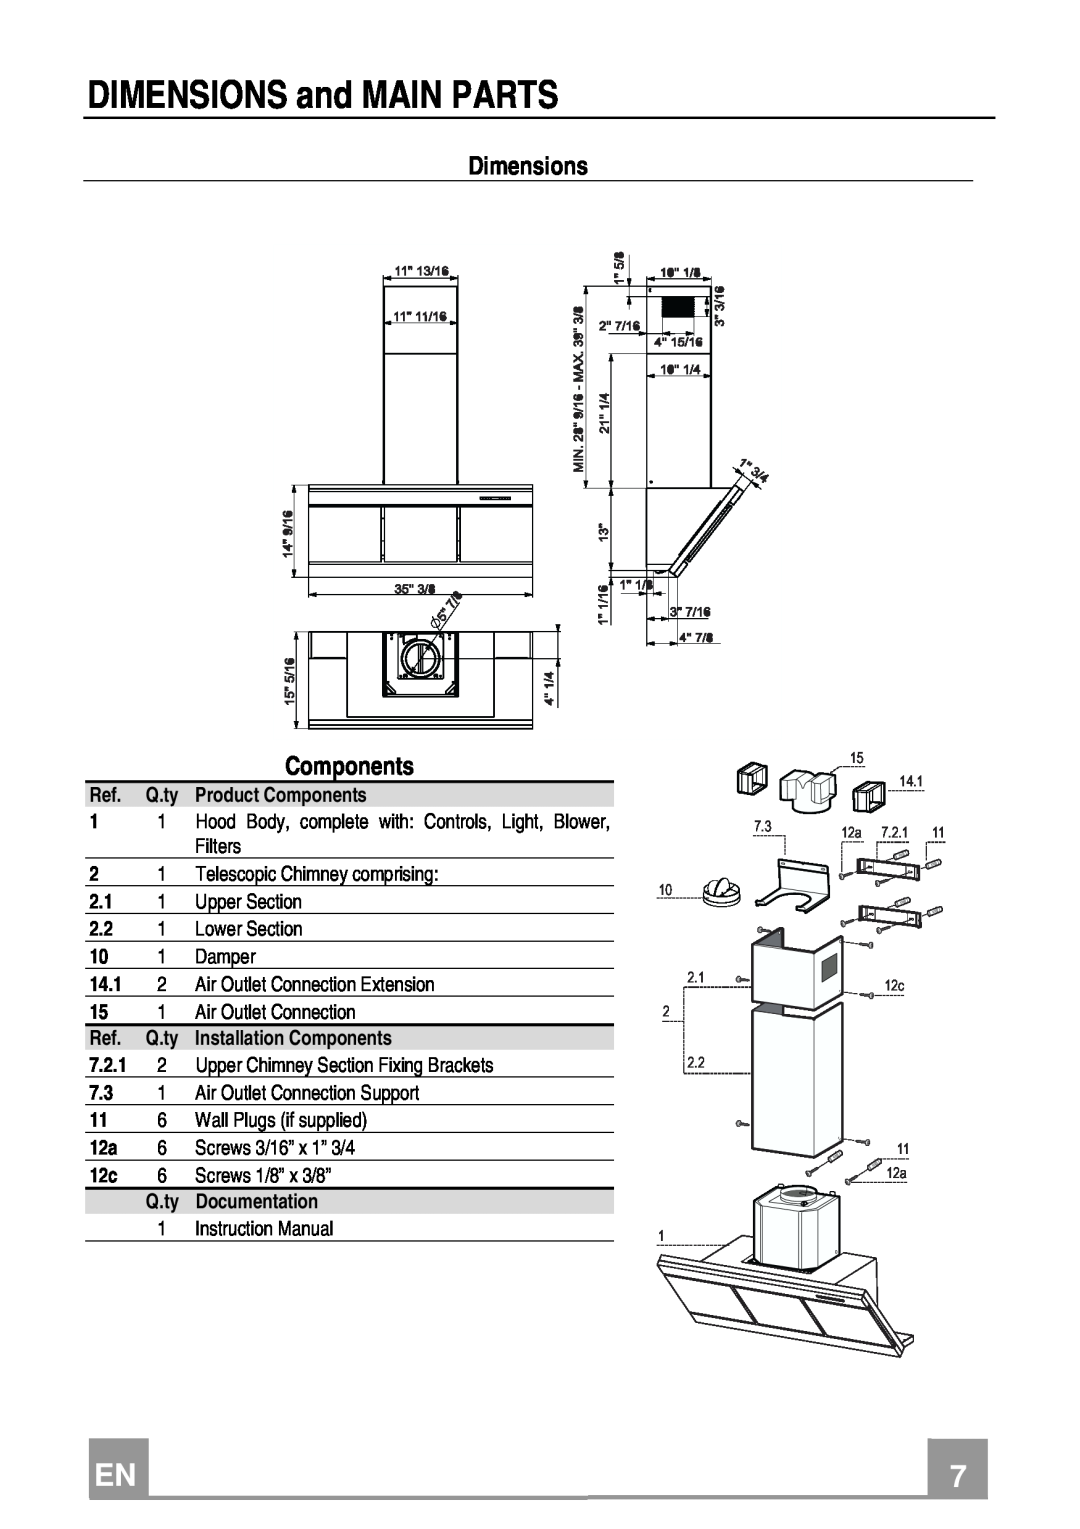 Franke Consumer Products FMY 367 installation instructions DIMENSIONS and MAIN PARTS, Dimensions, Components 